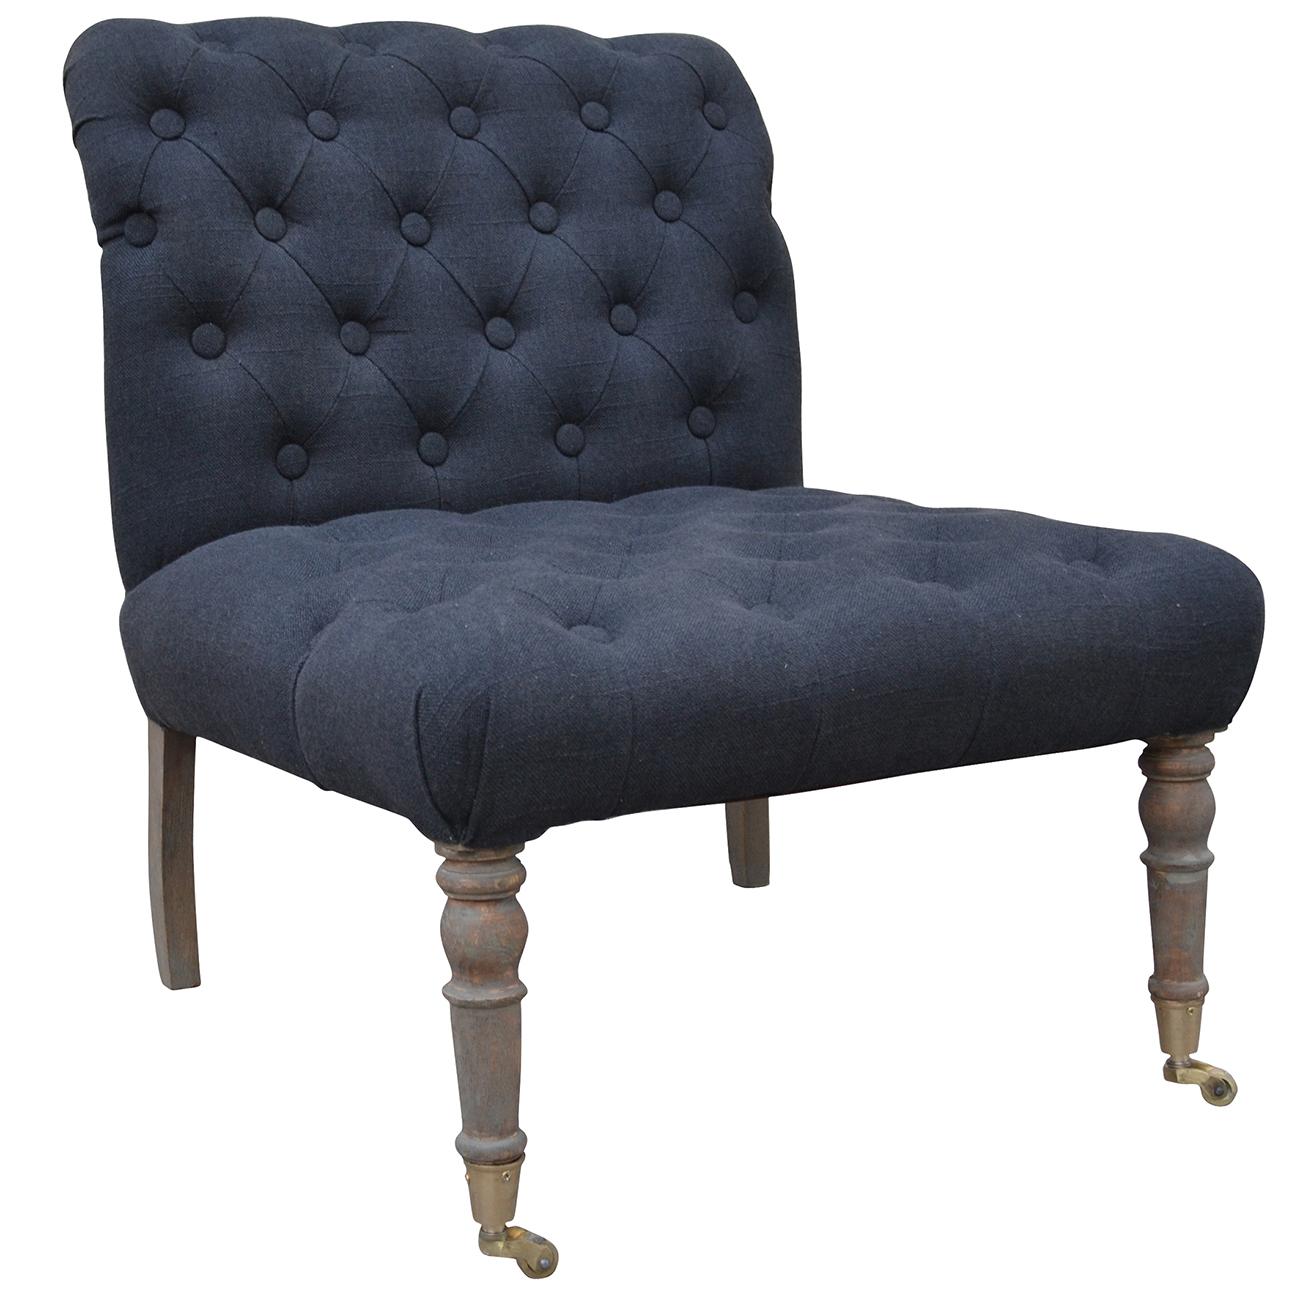 

    
A&B Home AV41050 Traditional Black Linen Upholstery Tufted Accent Chair (Set 2)
